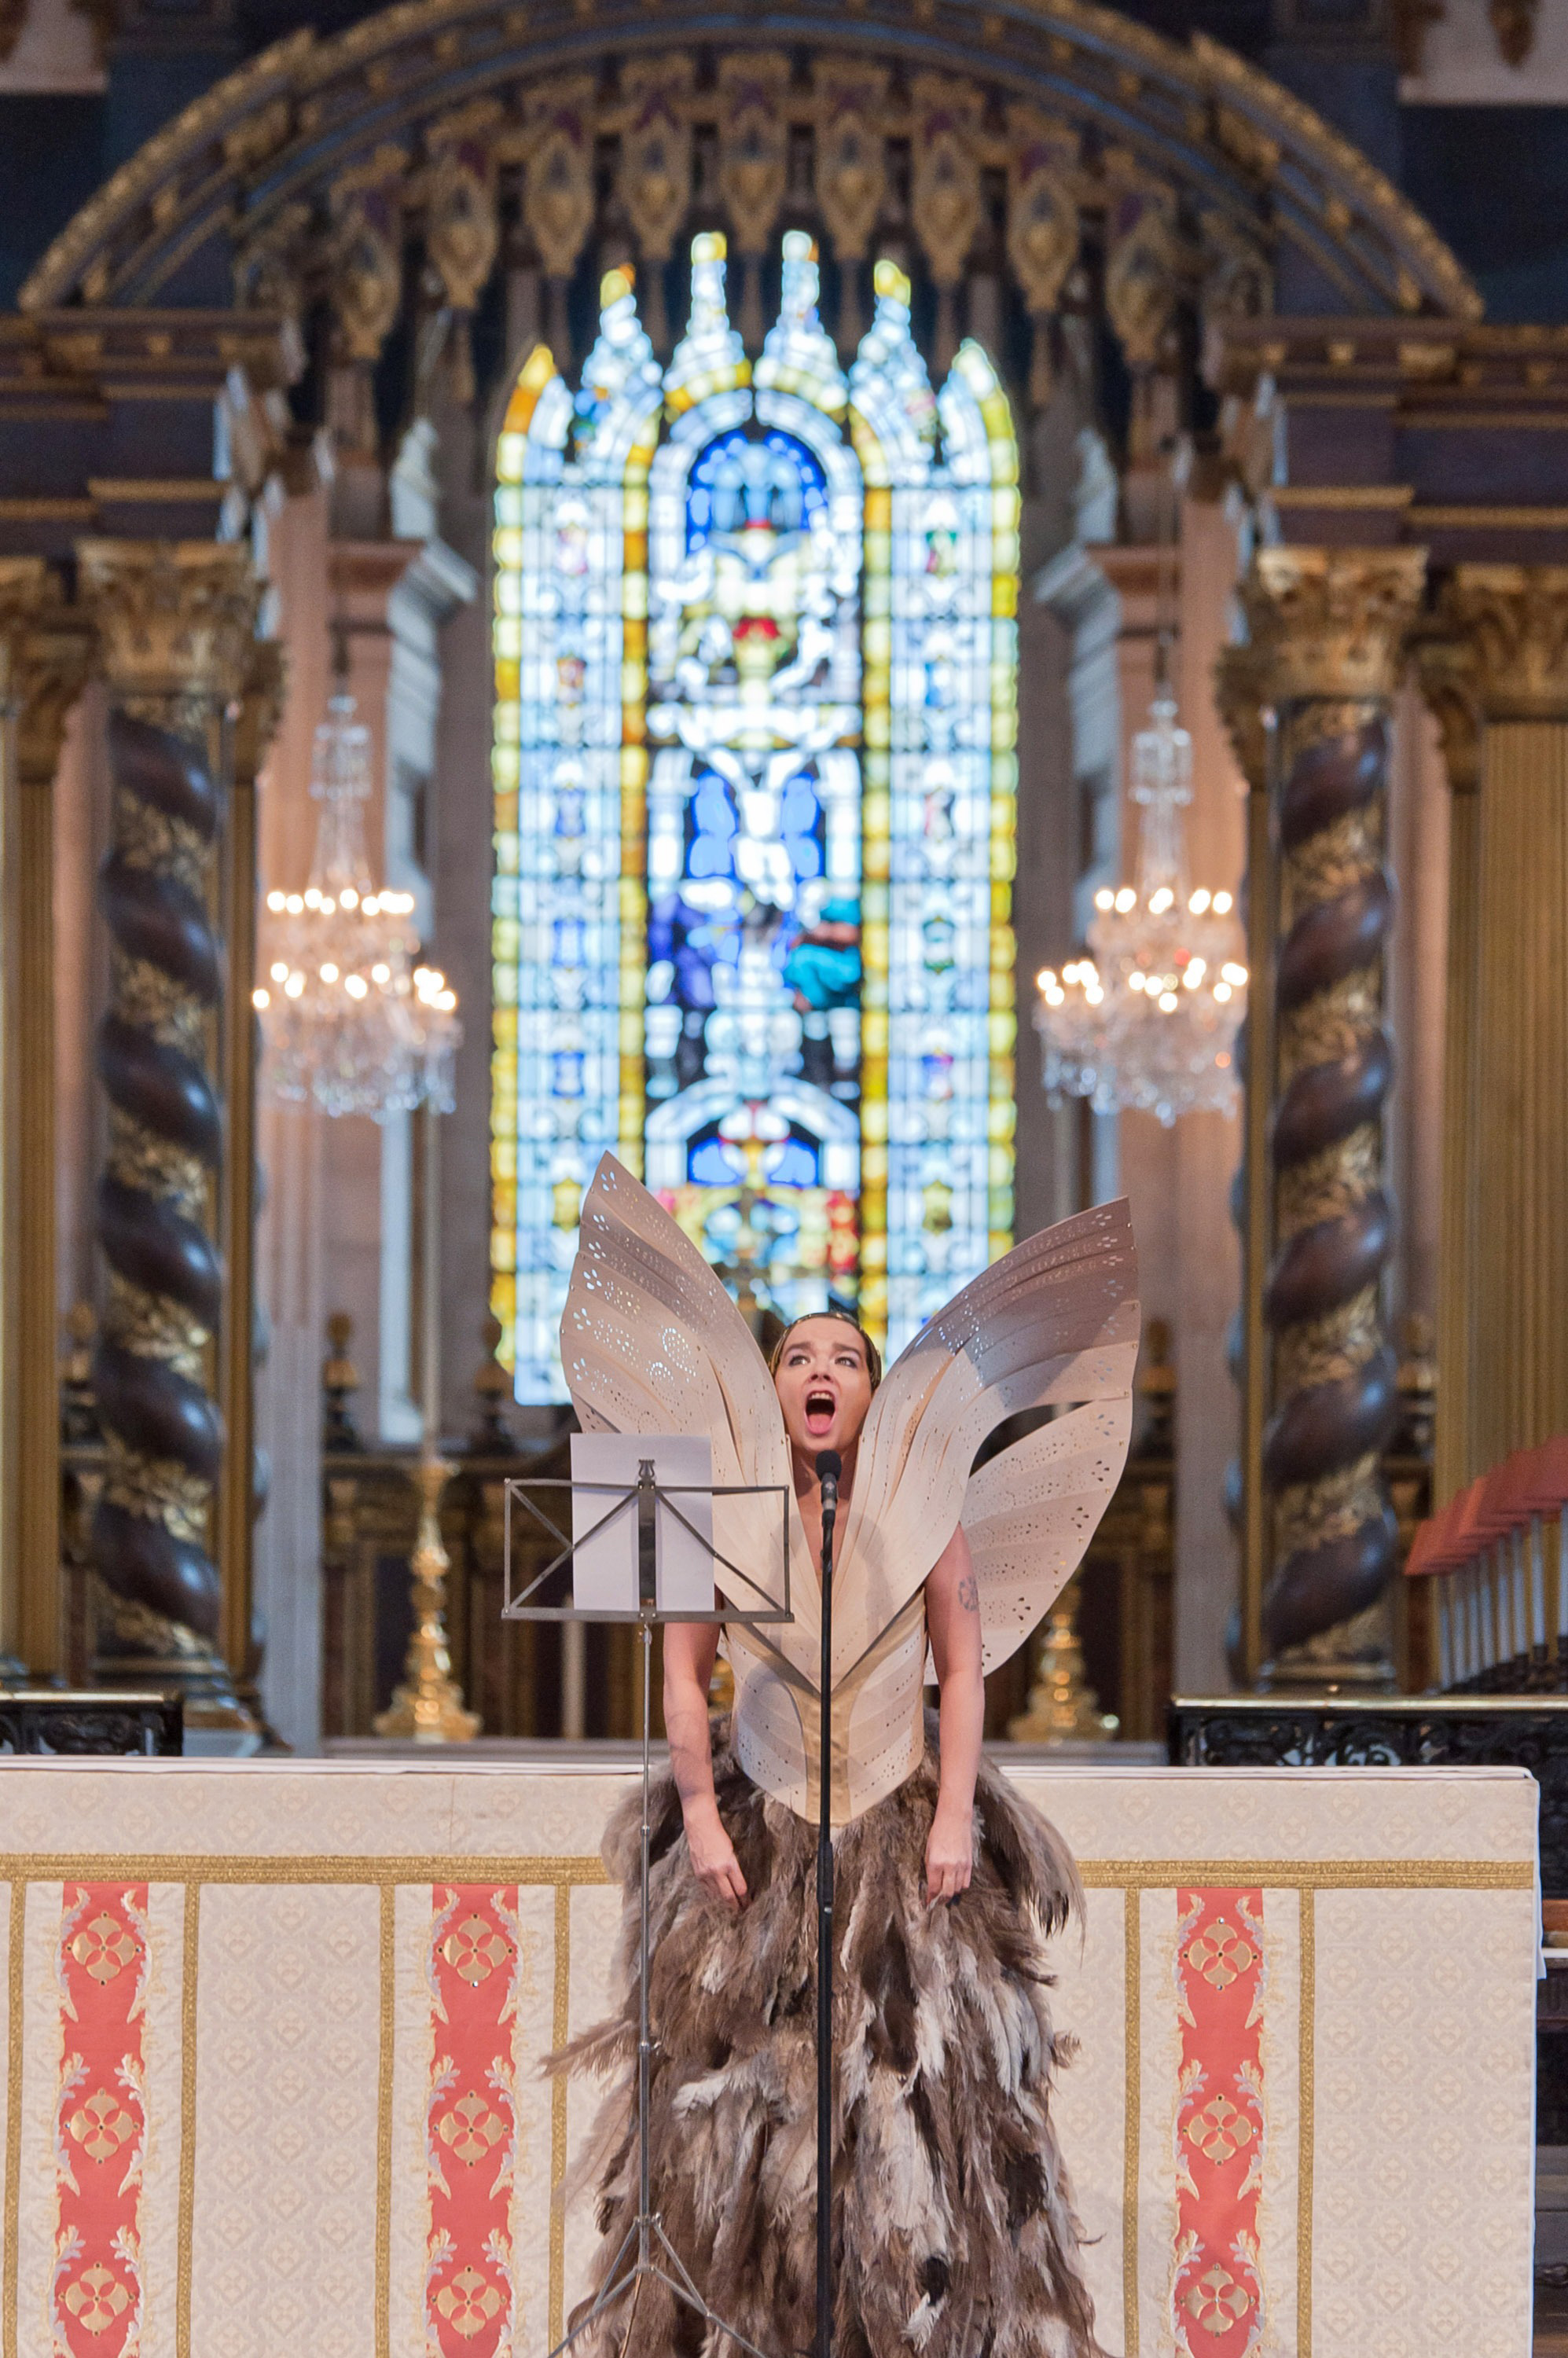 Björk performs at the Alexander McQueen Memorial Service at St. Paul's Cathedral in London on Sept. 20, 2010.